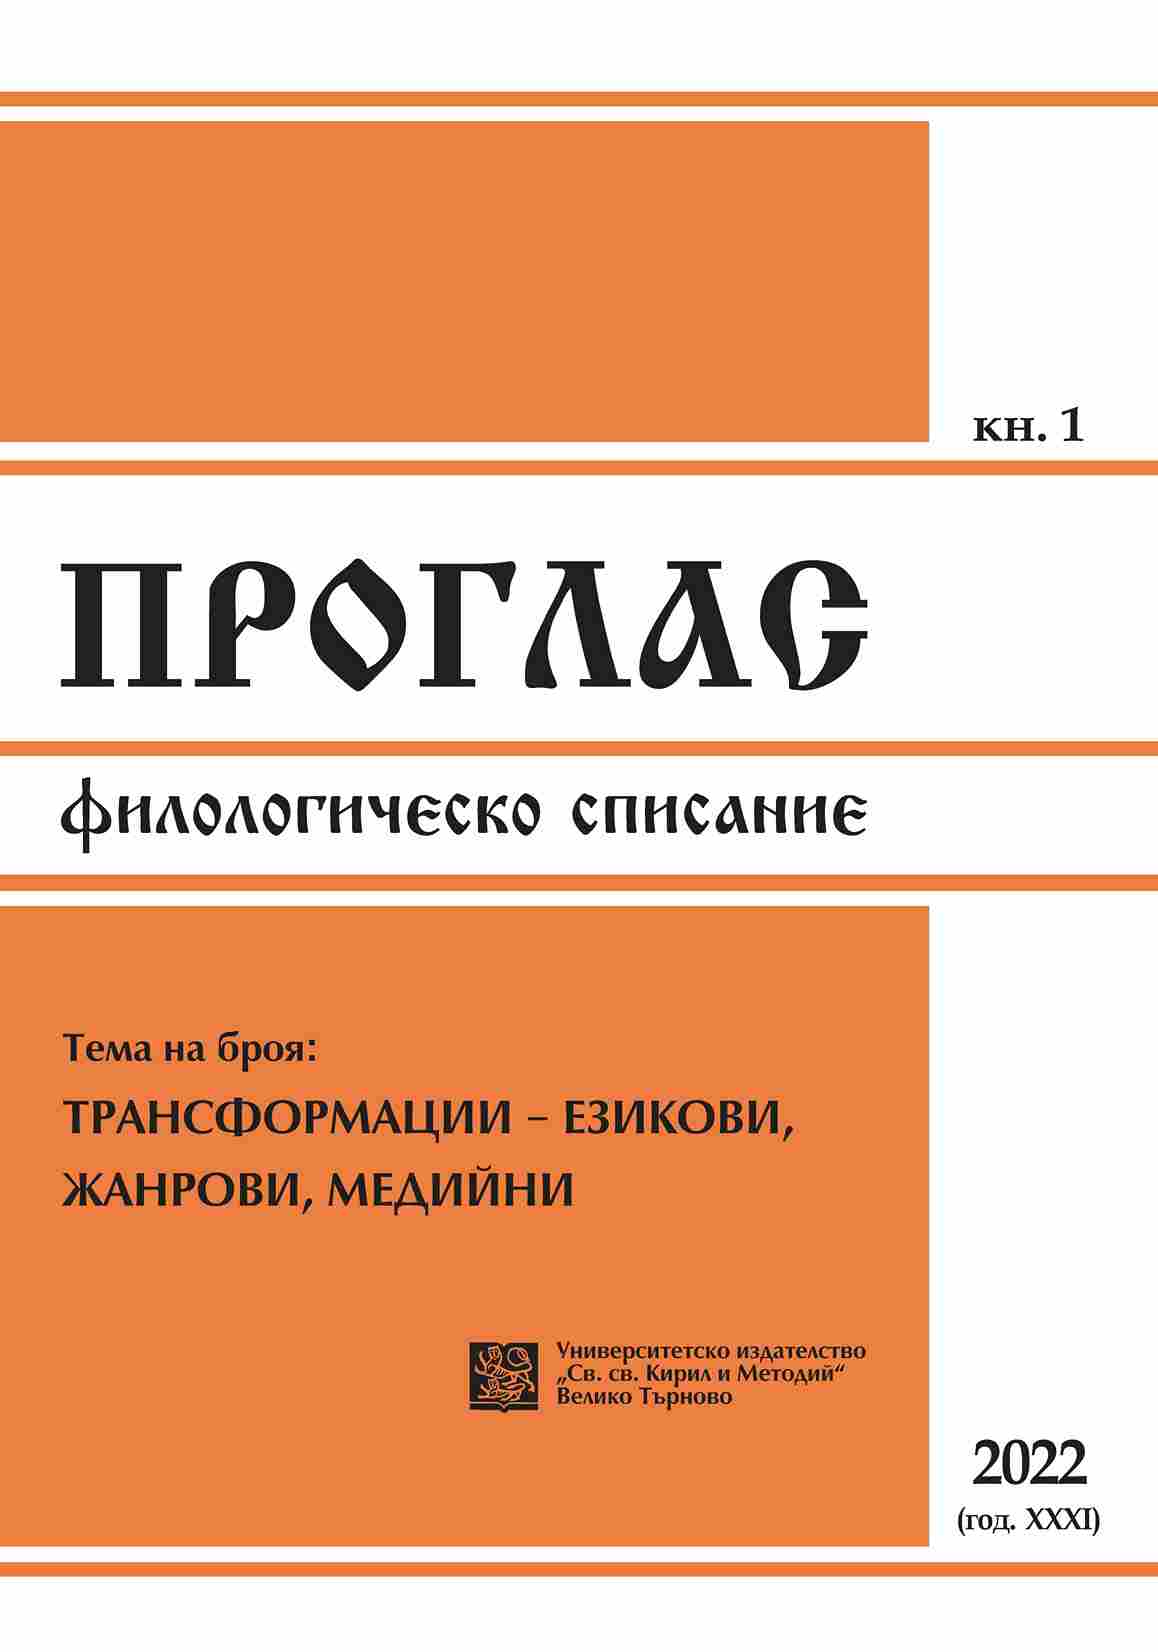 Meeting of the Bulgarian-Language Departments of the Universities of Veliko Tarnovo, Sofia, Plovdiv, Shumen and the South-West University Cover Image